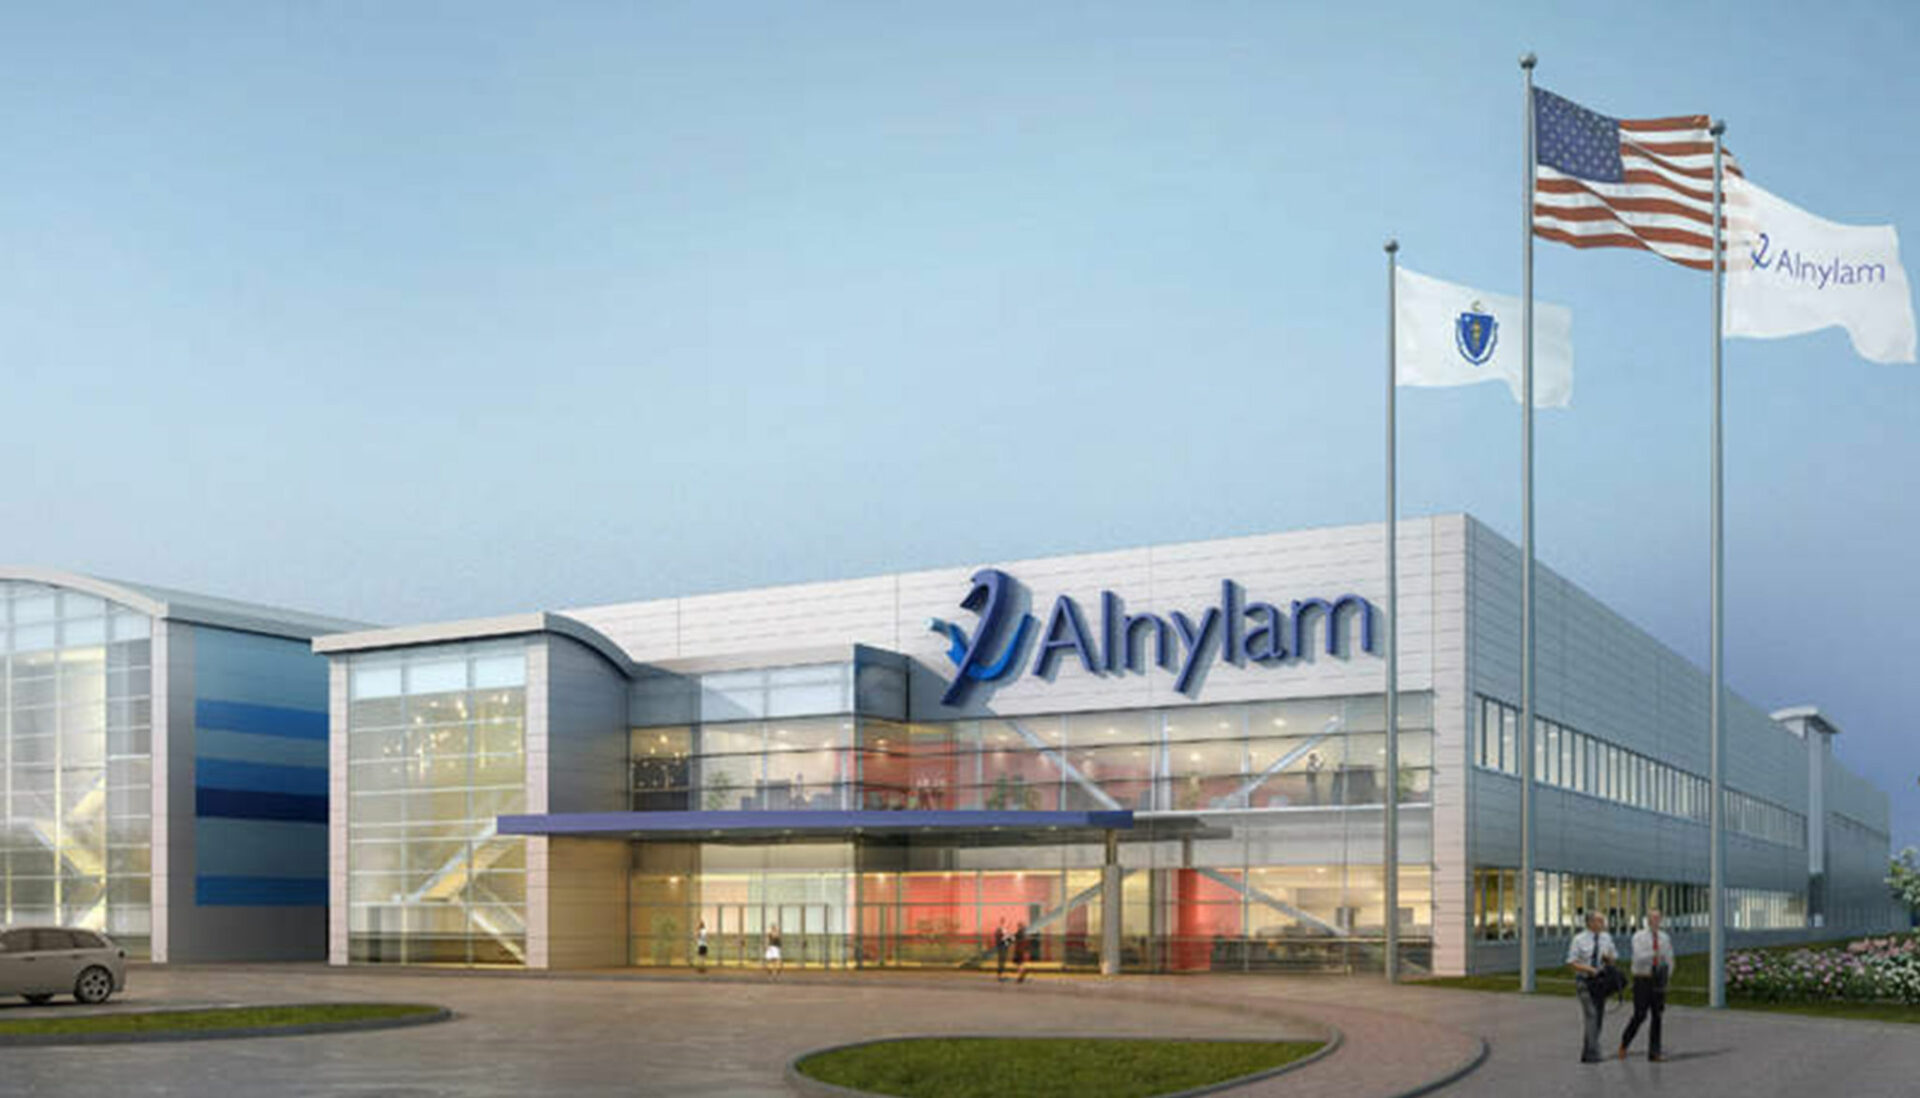 Alnylam Awards Albireo Energy Building Automation Integration Scope of New Cutting-Edge Manufacturing Facility